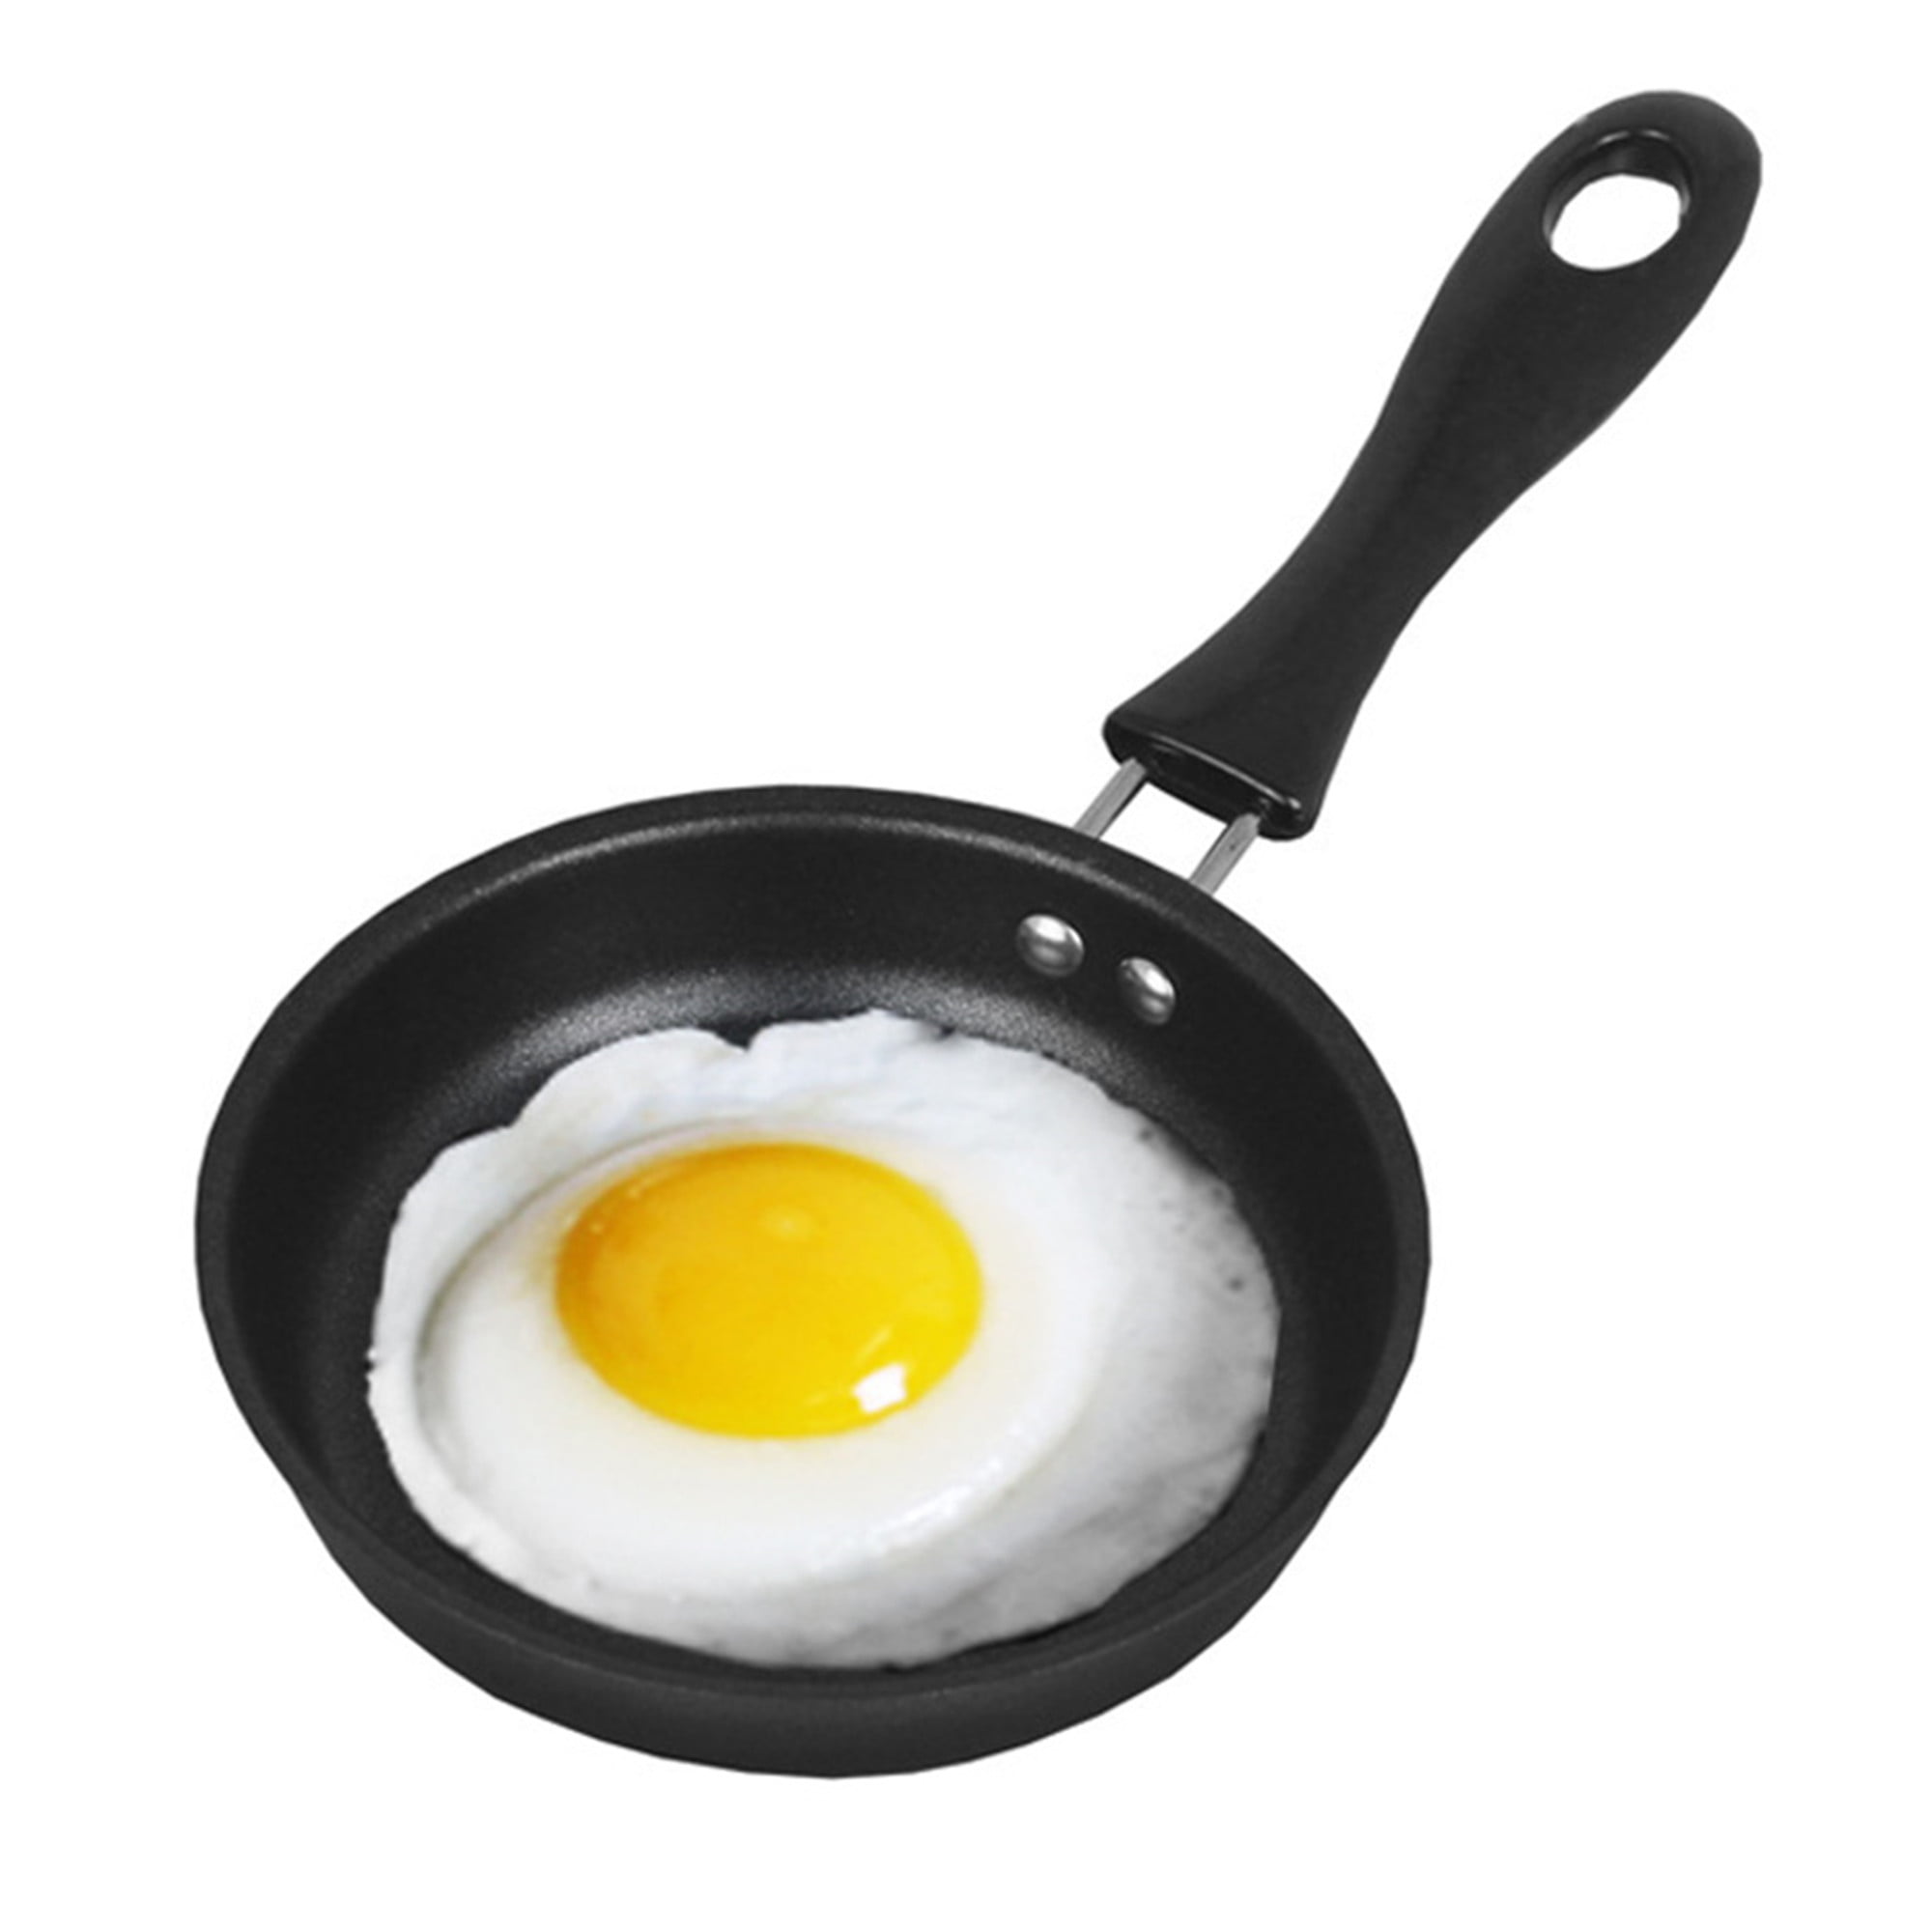 Norpro 9.5 inch Fry Pan Skillet with Includes Nonstick Removable Egg Poacher New 